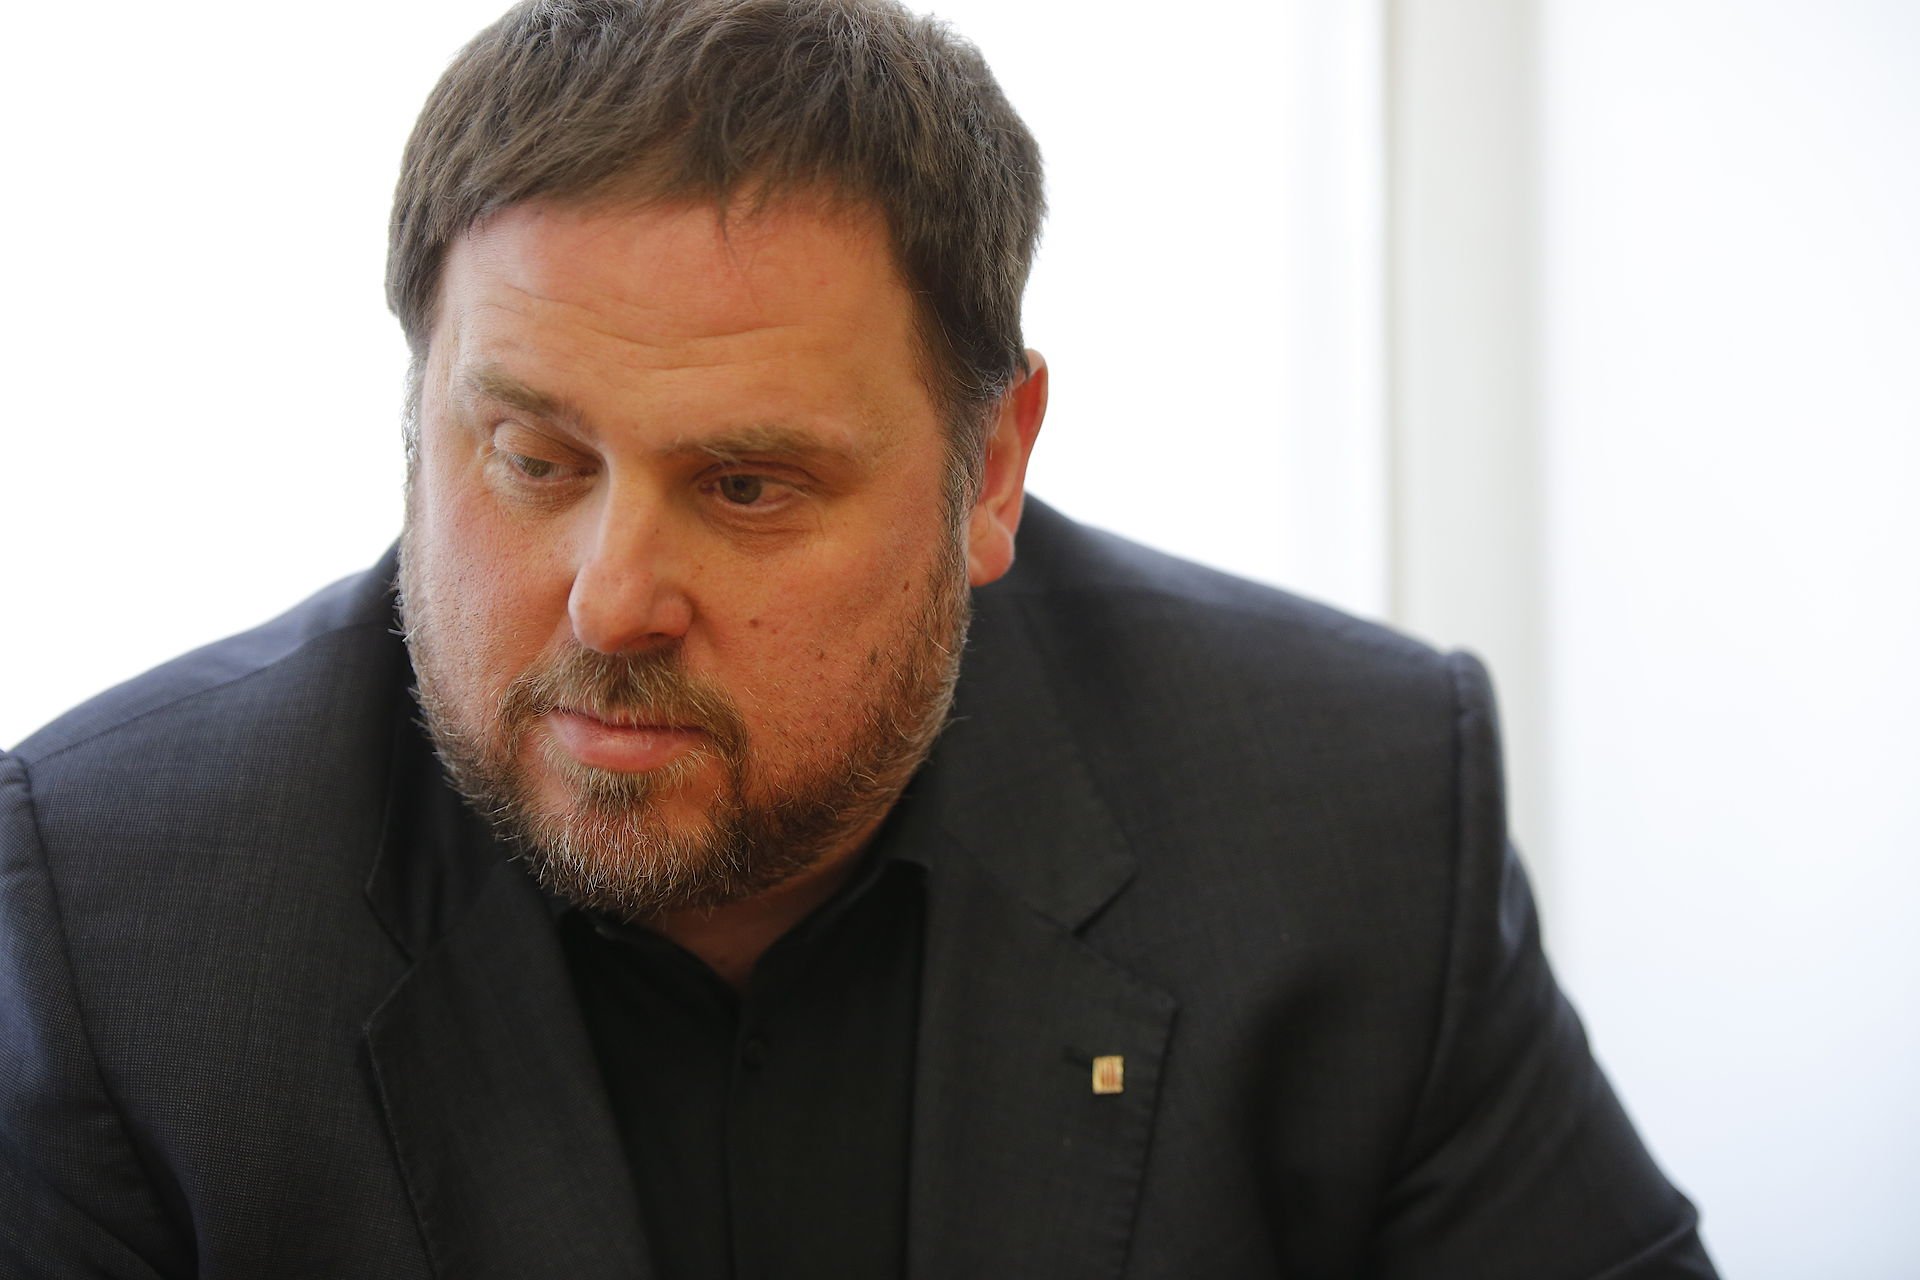 Oriol Junqueras: "Look me in the eyes, Miquel, and tell me why my sentence is just"